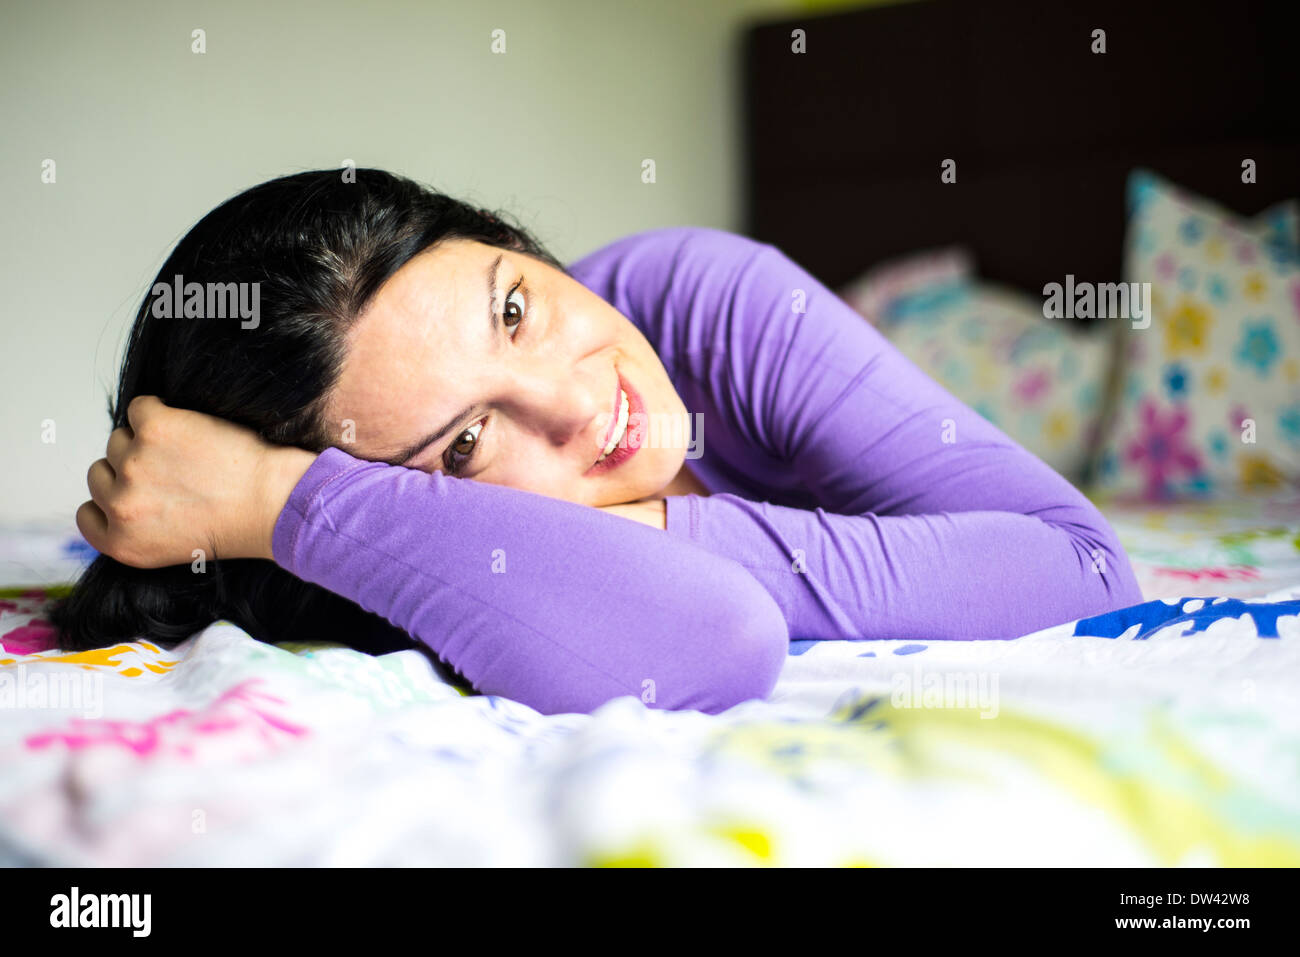 Smiling woman lying in her bed in day light Stock Photo